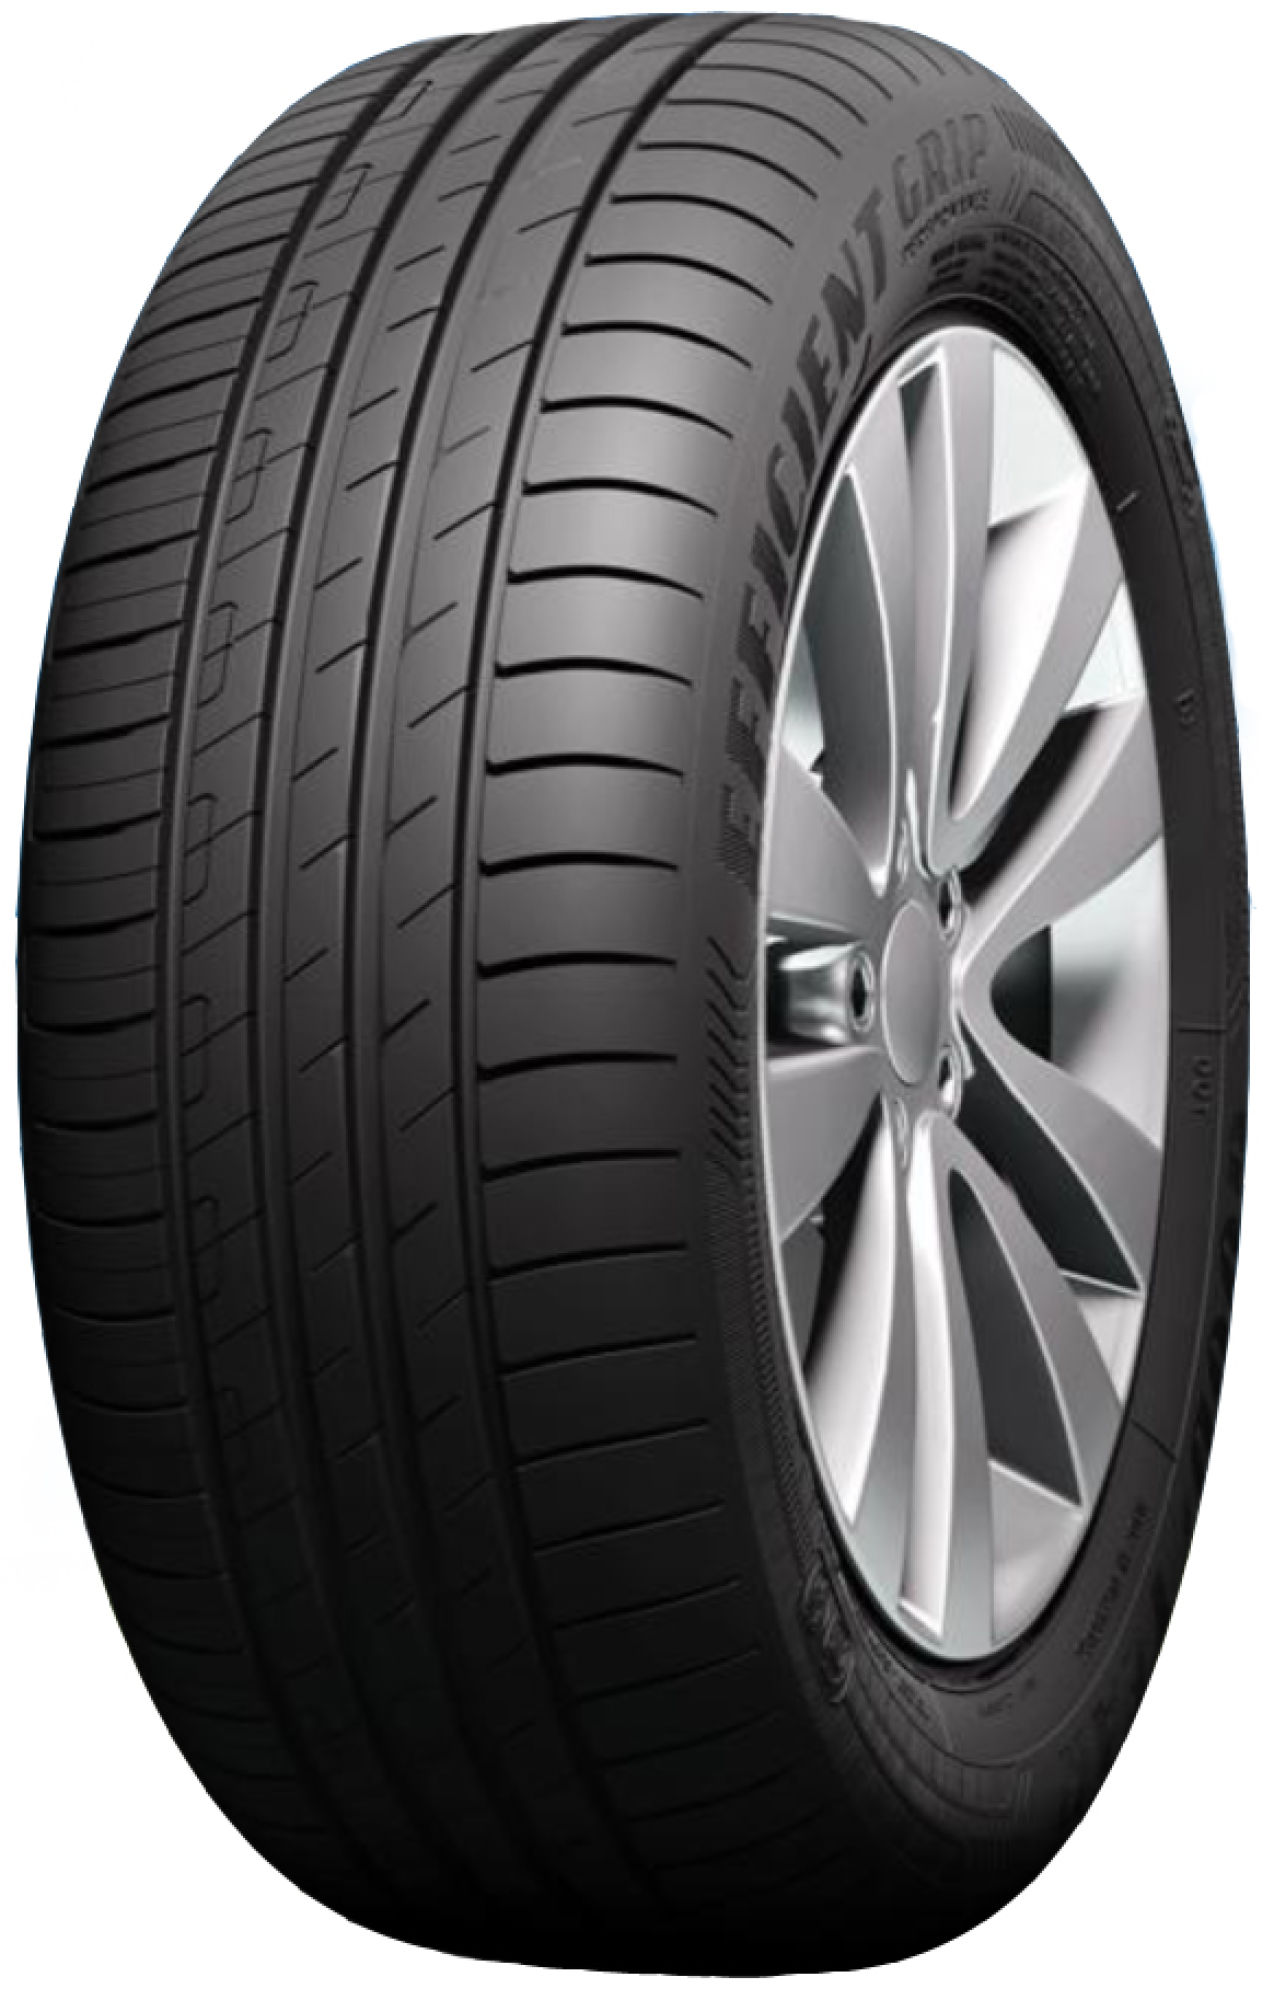 Goodyear EfficientGrip Performance - Tire Reviews and Tests